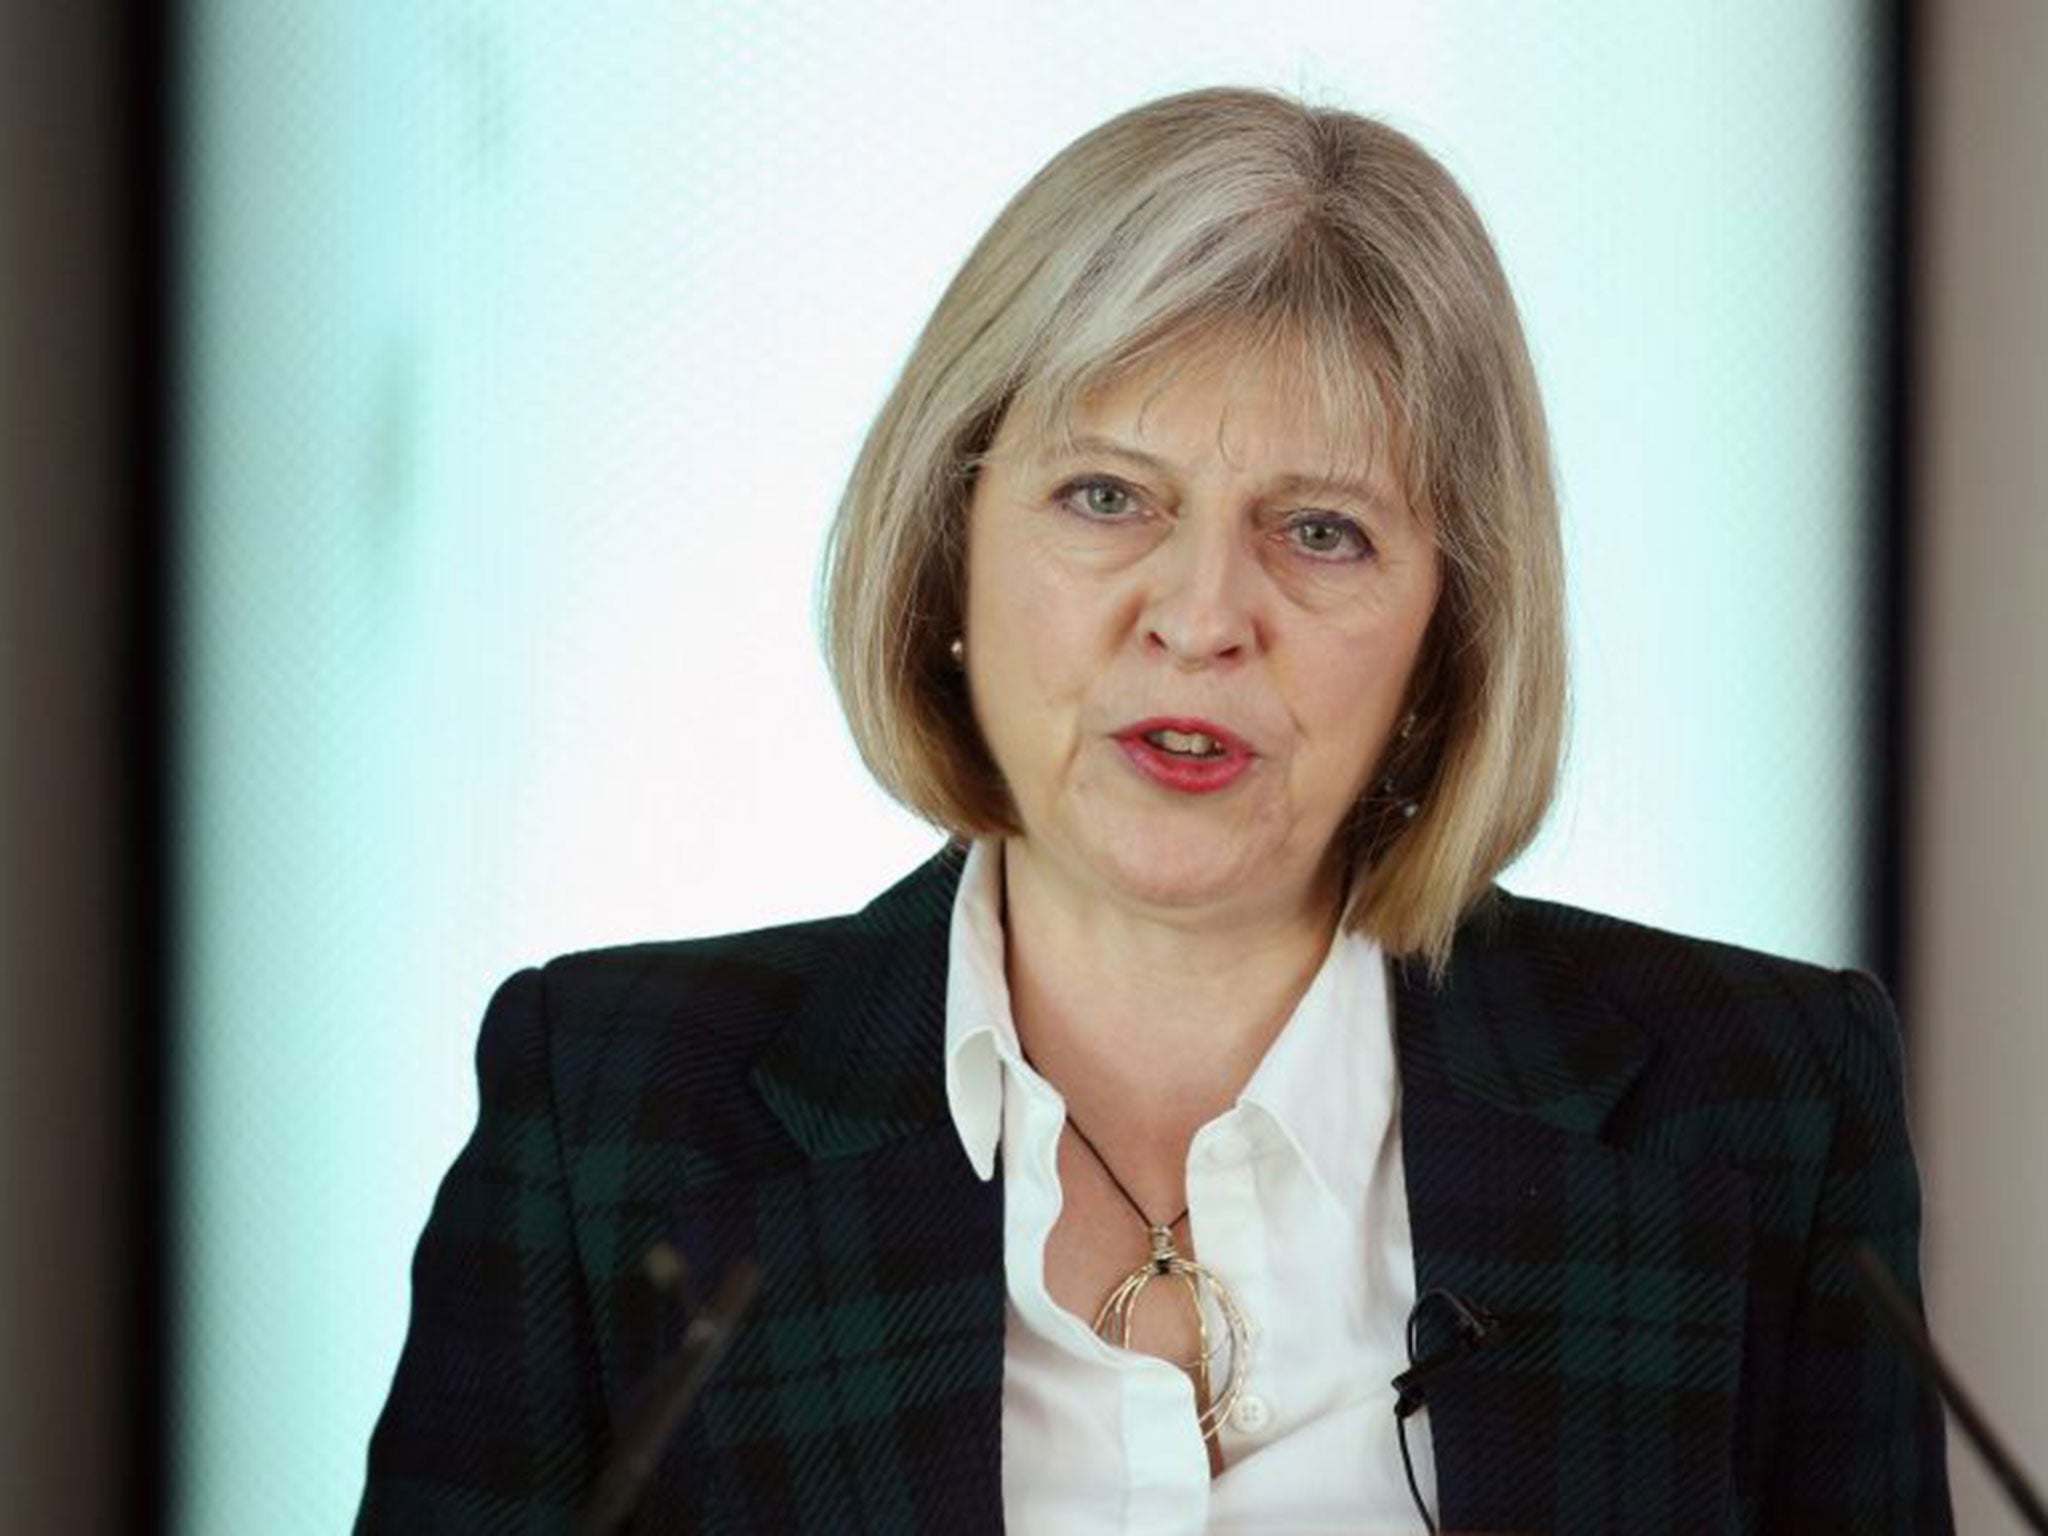 Home Secretary Theresa May will outline plans to curb extremists’ freedom of speech (Getty)